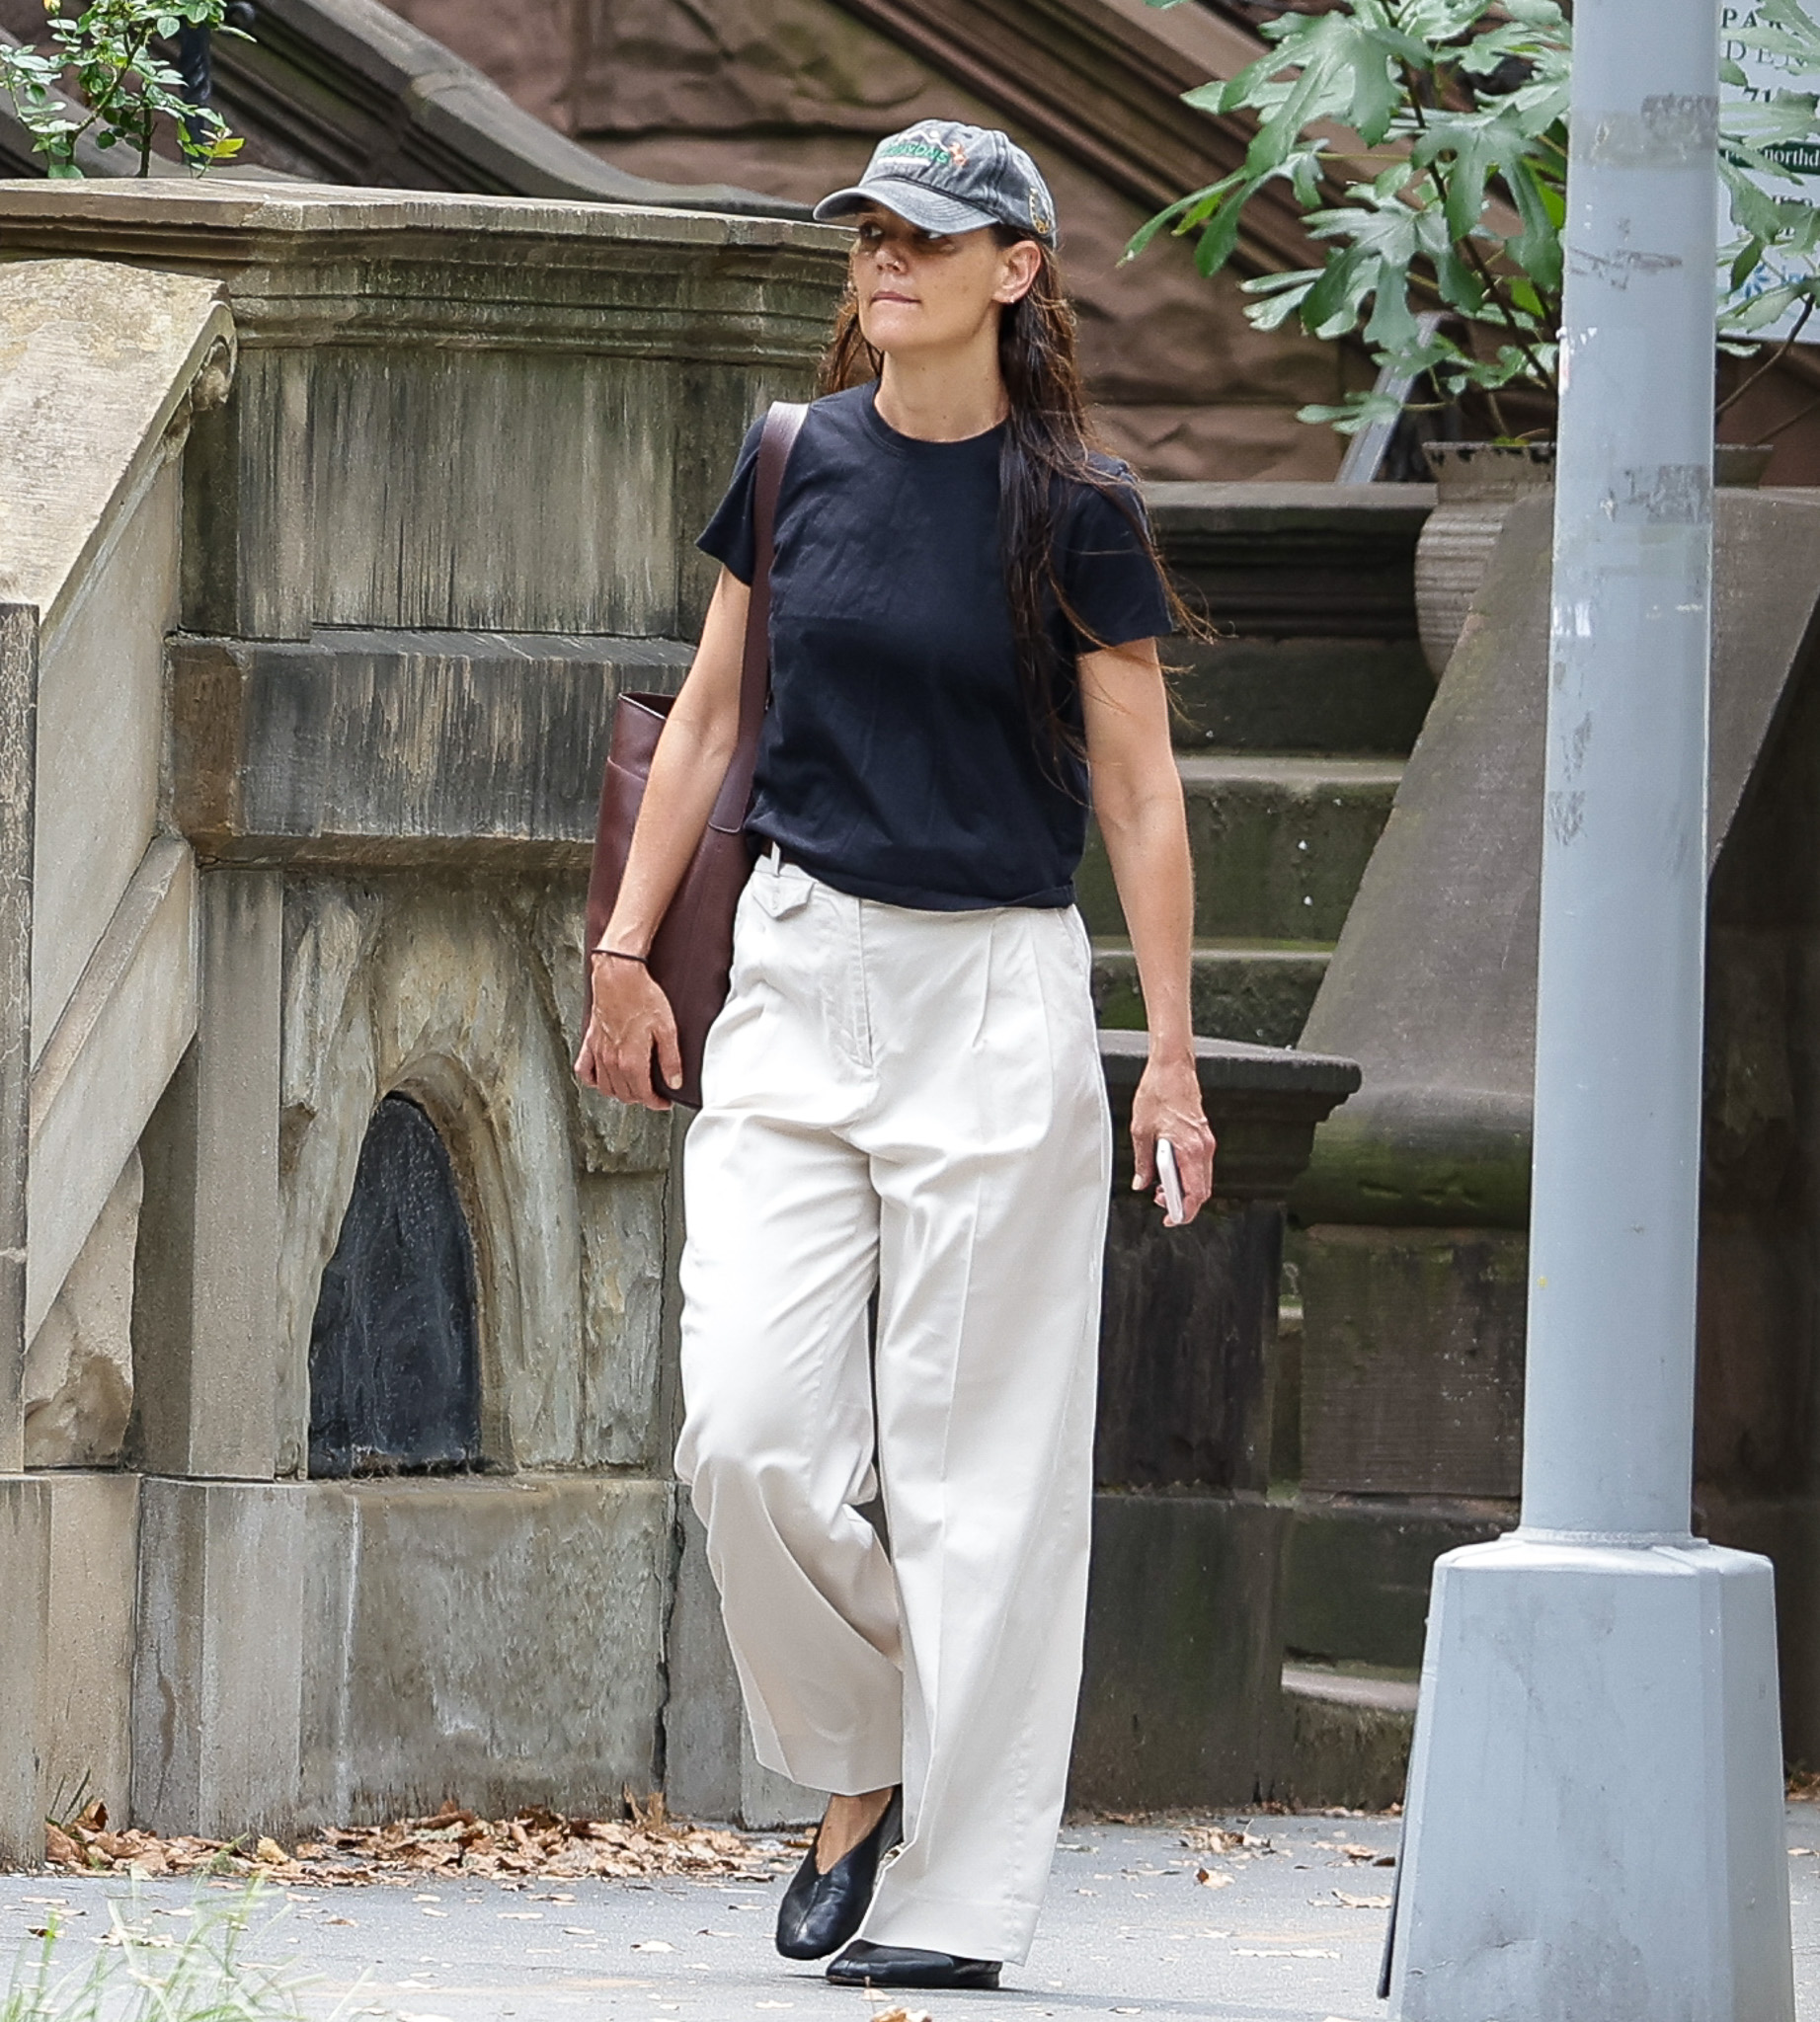 The actress kept it casual, rocking white pants and a chic black top, but hid her bruised face beneath a baseball cap